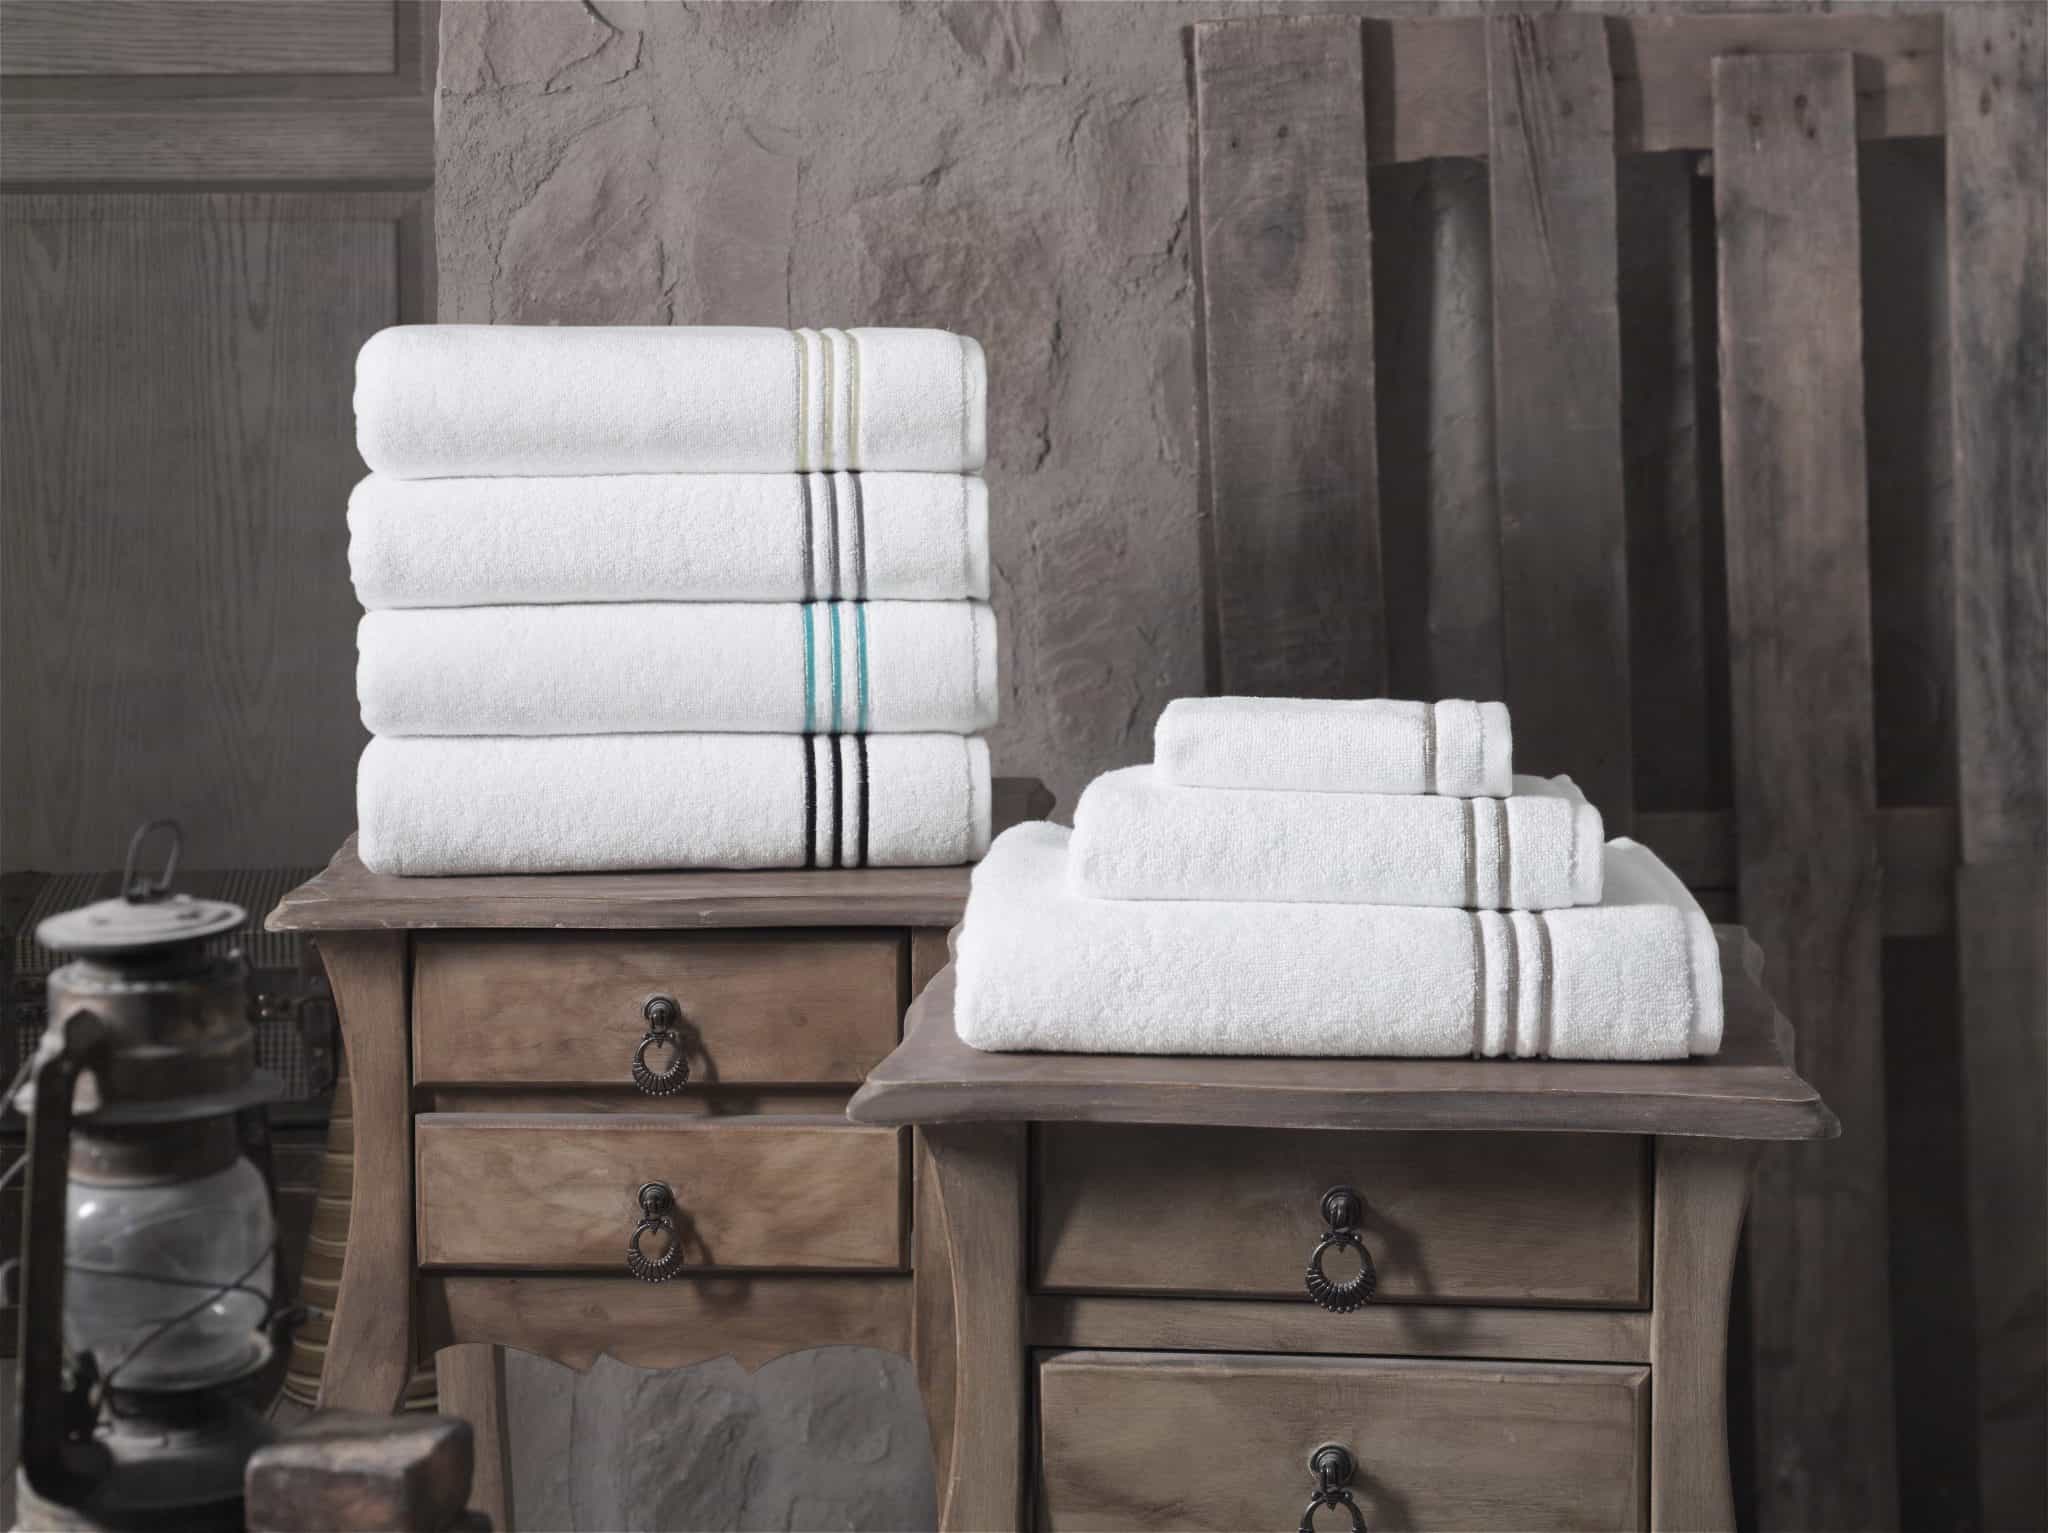 10 Simple Ways to Make Your Towels Soft and Fluffy